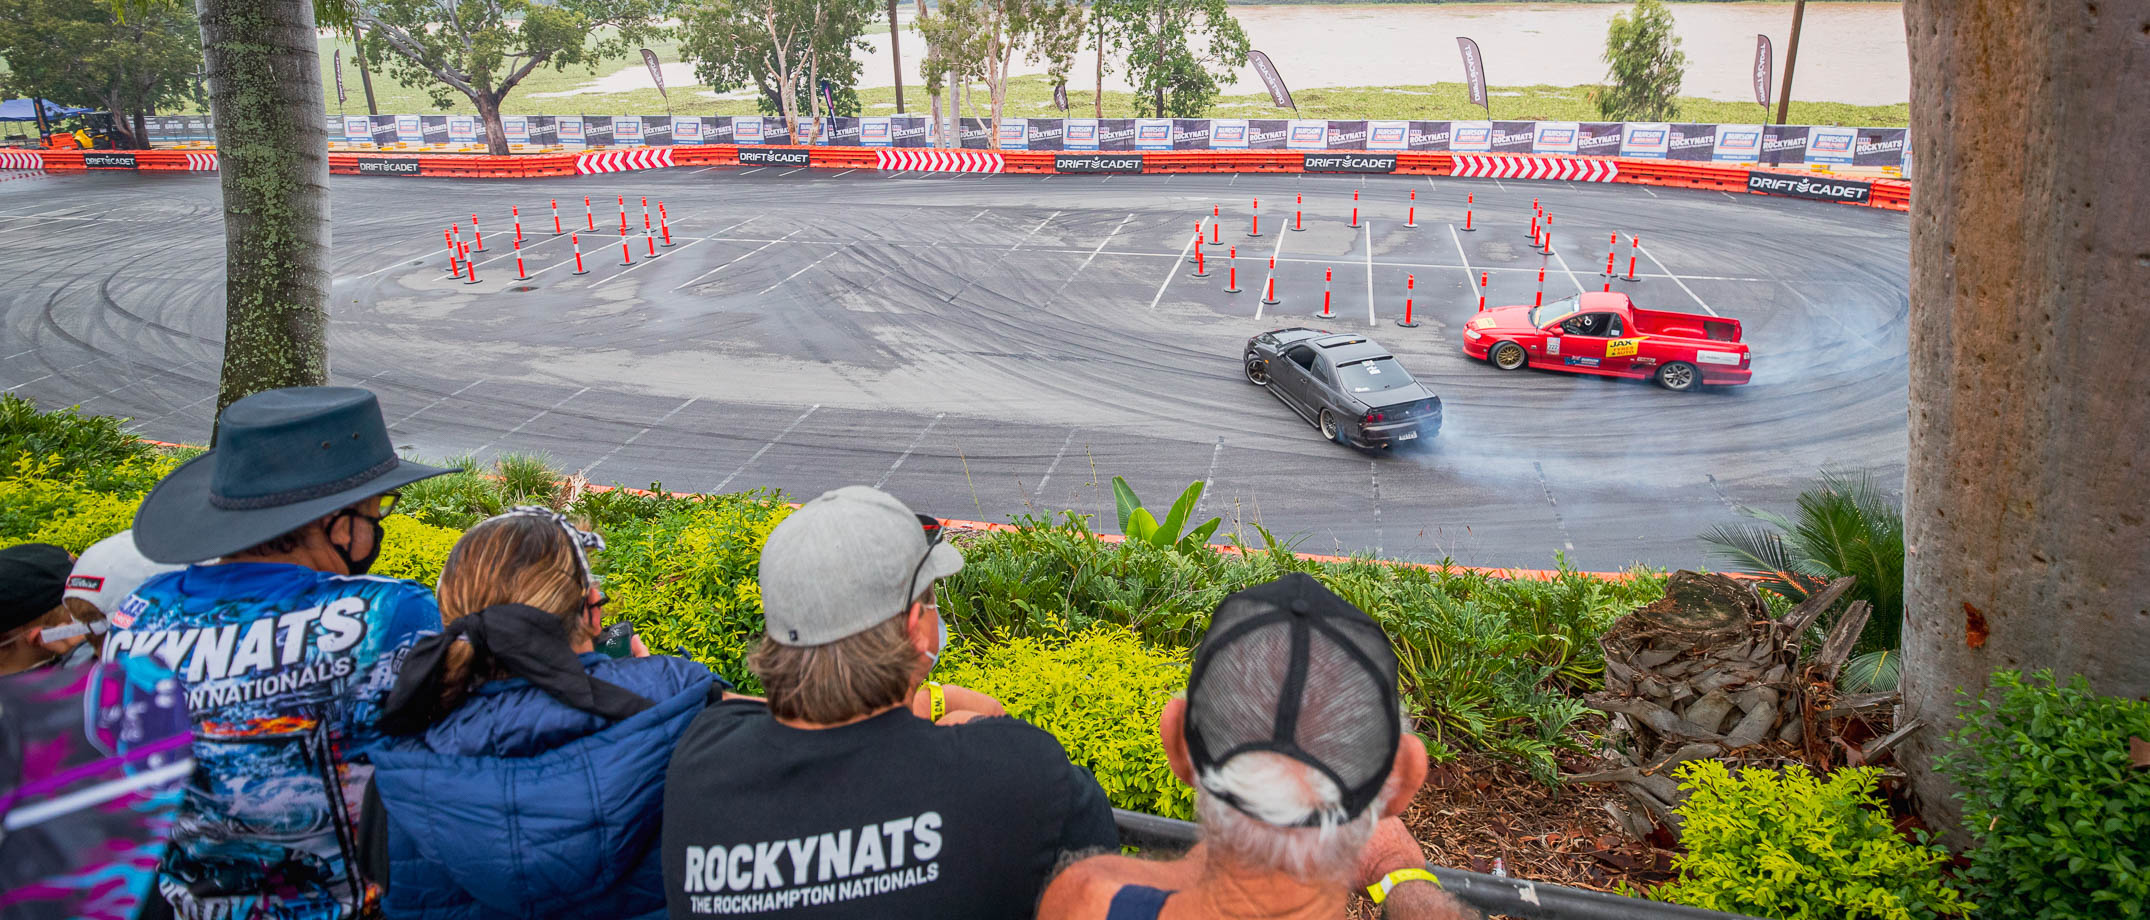 Car on drifting circuit with view of Fitzroy River - Rockynats